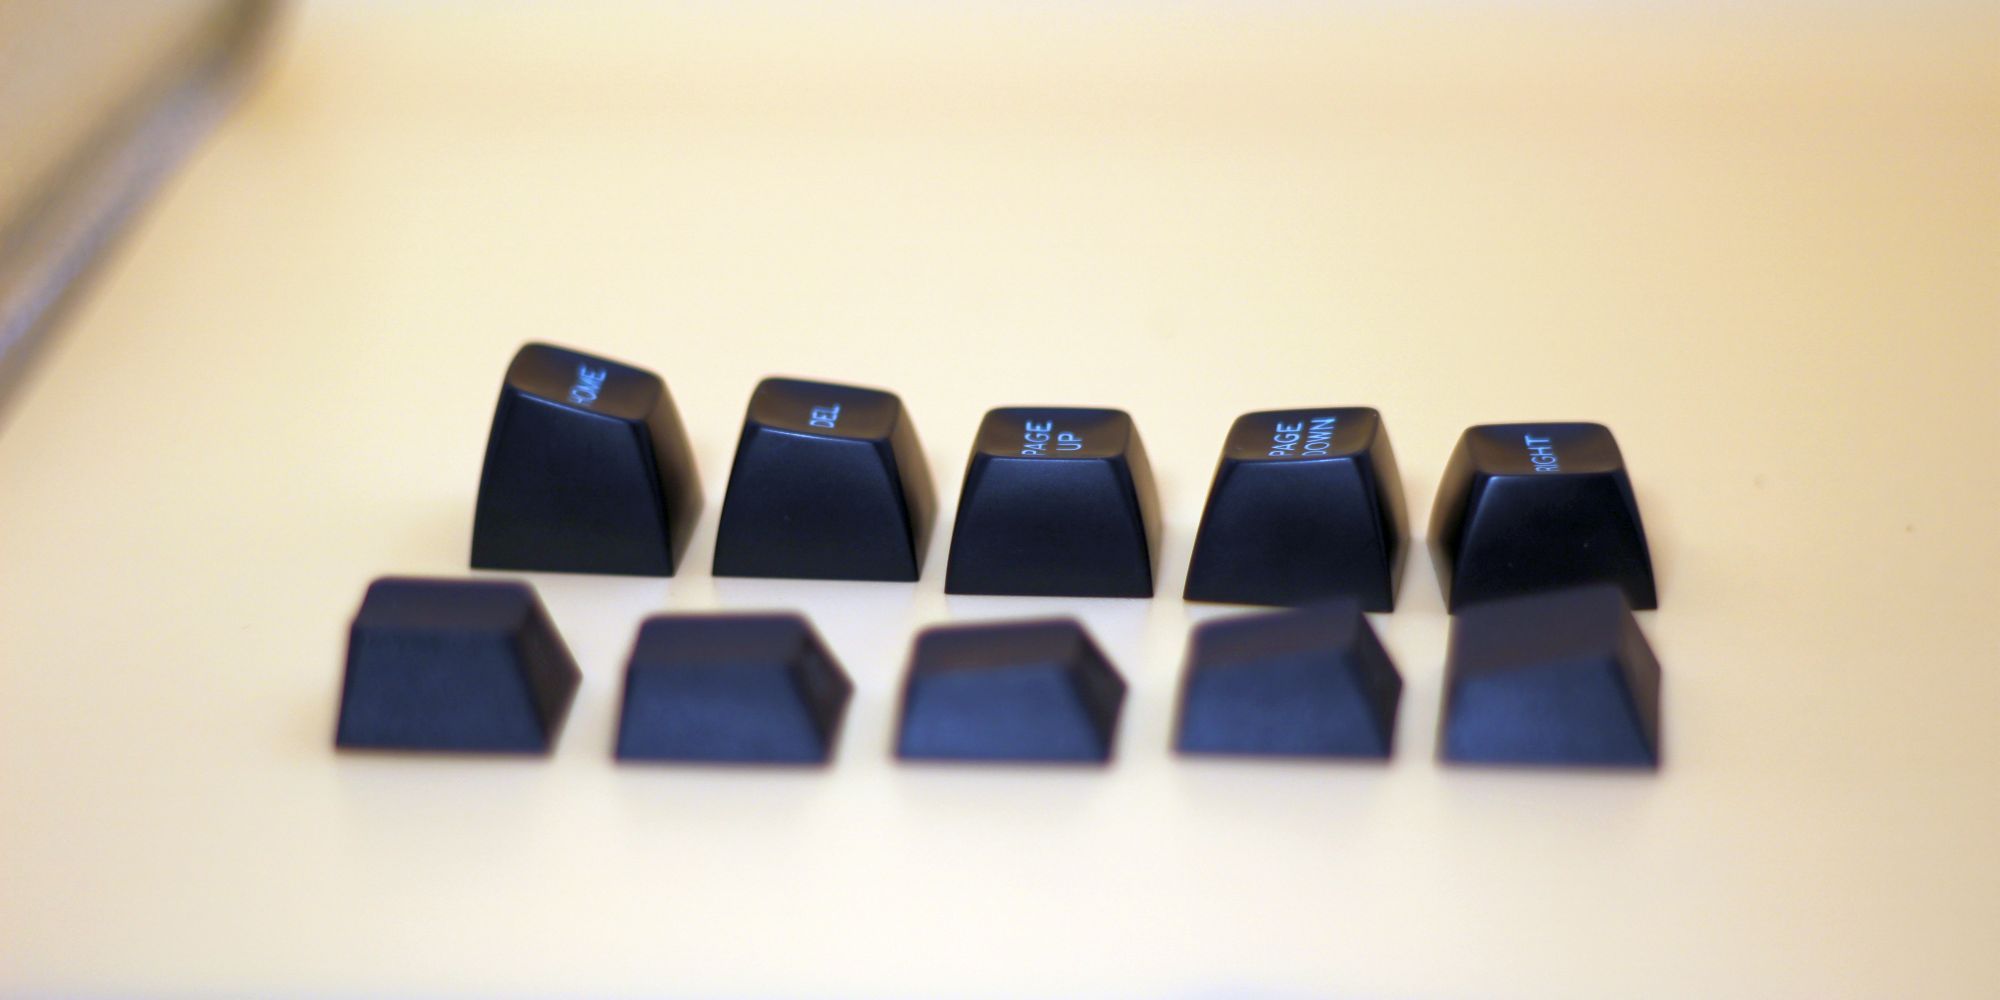 melgeek-mojo68-wireless-bluetooth-mechcanical-keyboard-review-keycaps-compared-side-02